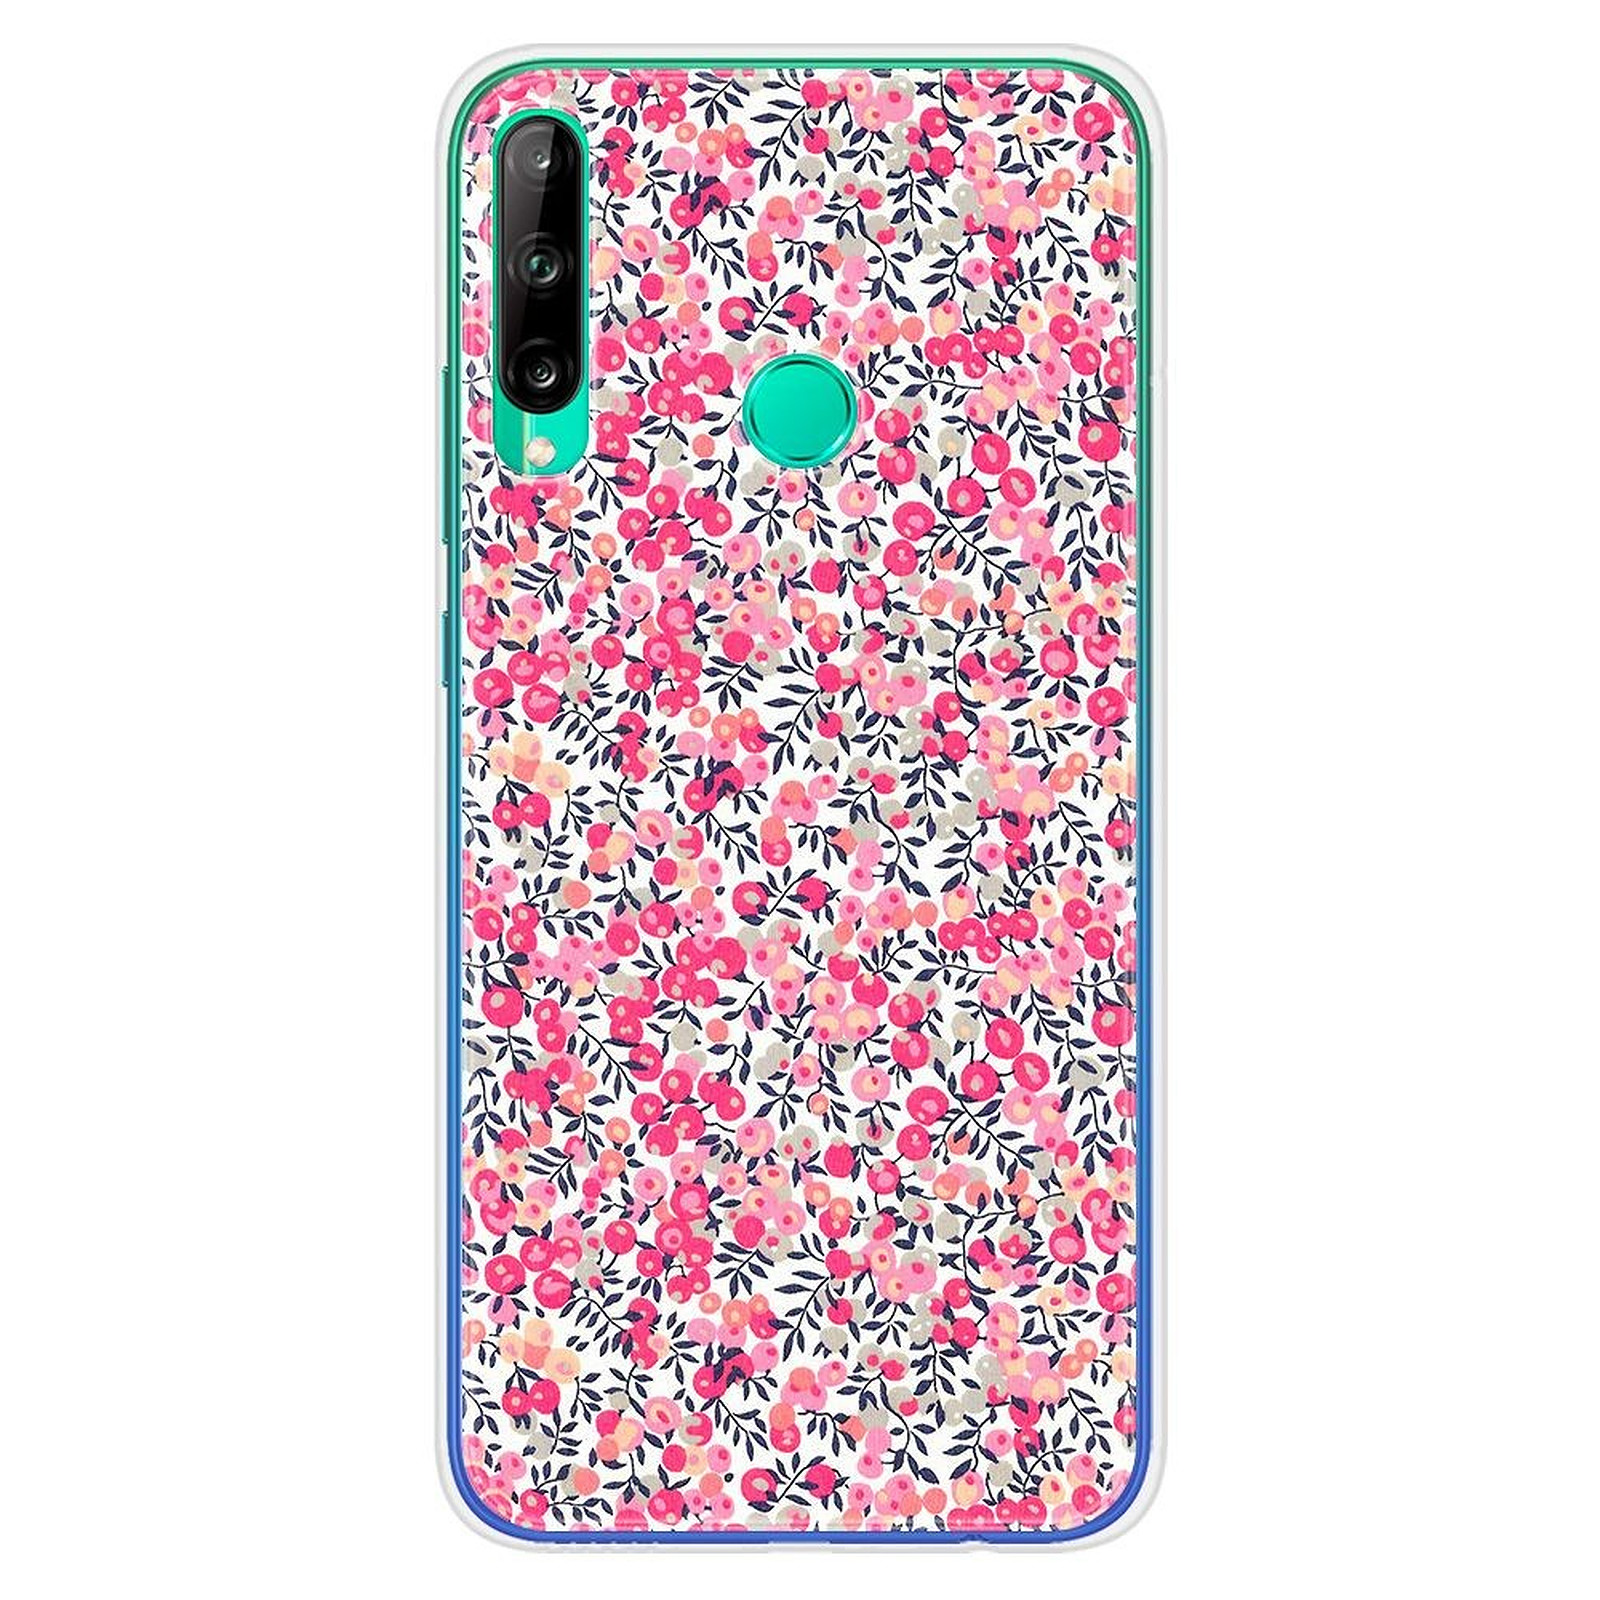 1001 Coques Coque silicone gel Huawei P40 Lite E motif Liberty Wiltshire Rose - Coque telephone 1001Coques